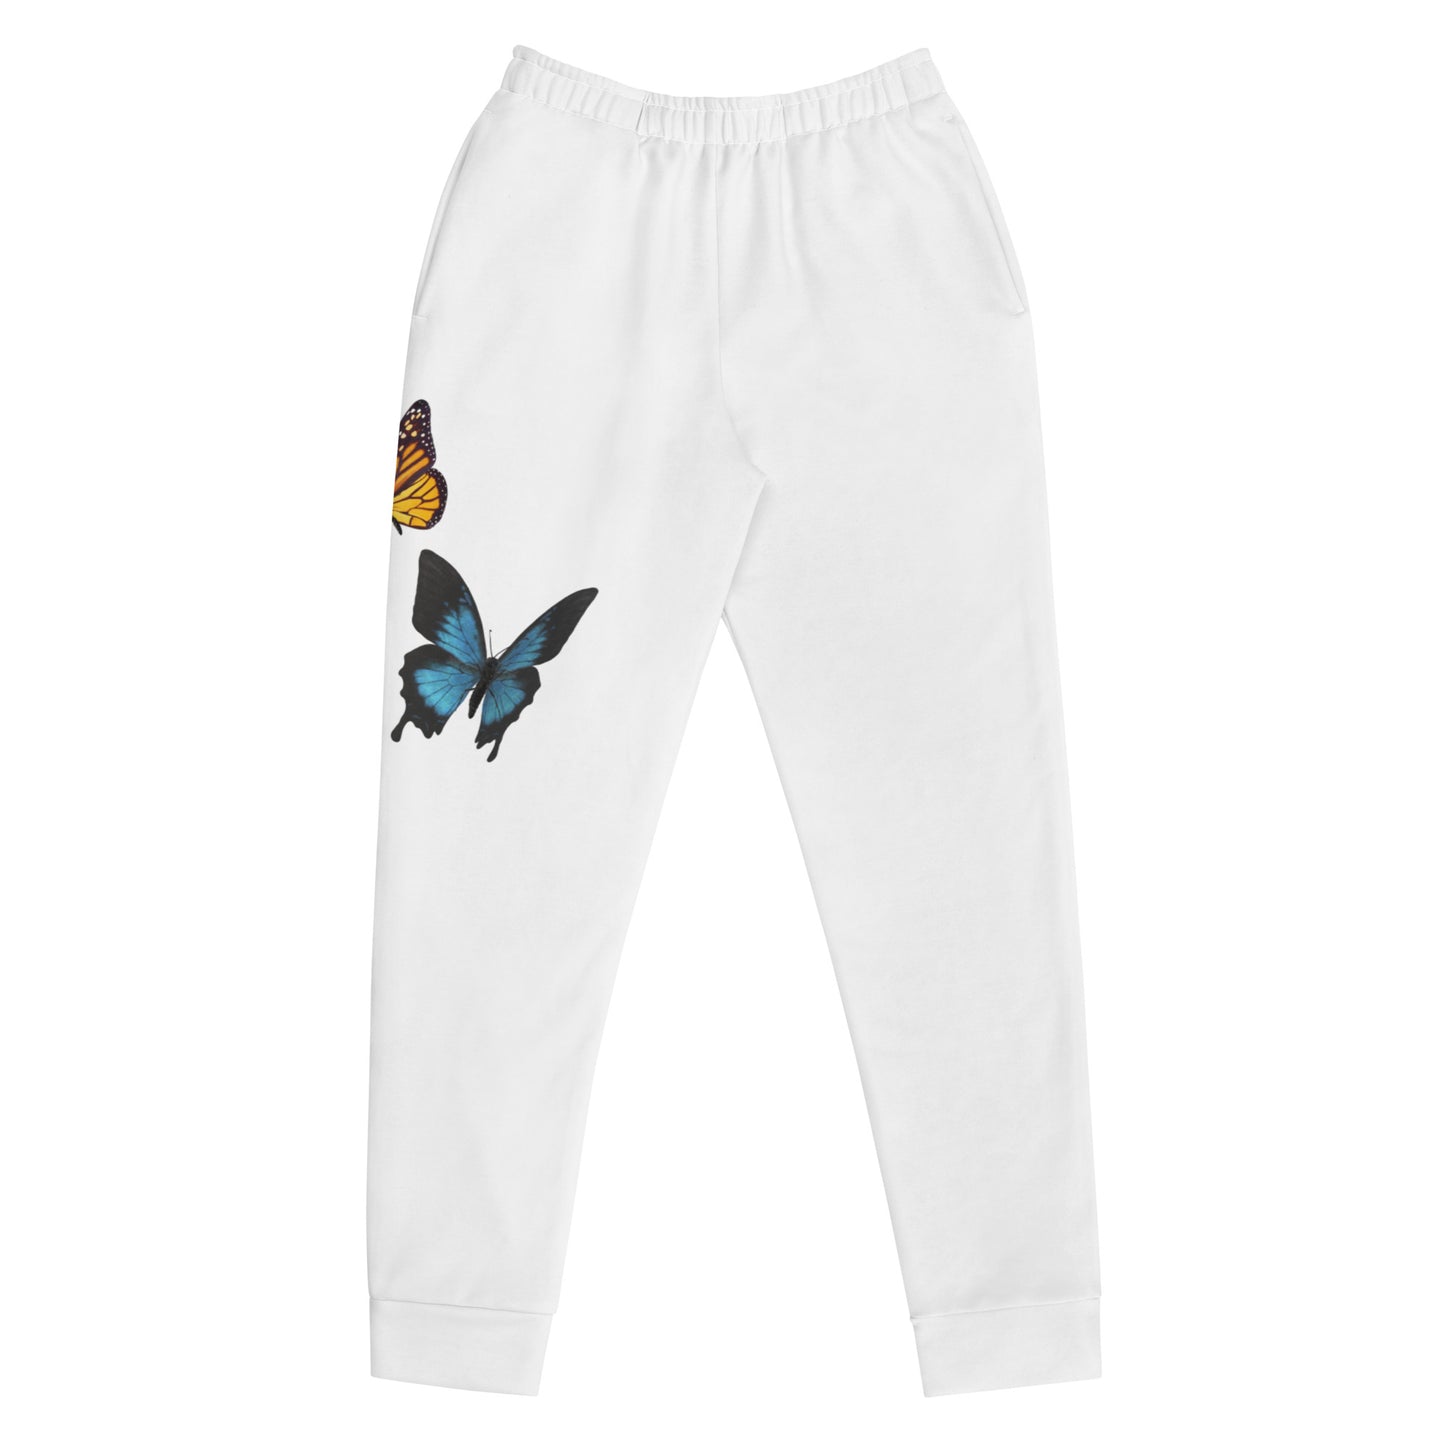 Free Spirit Butterfly Joggers